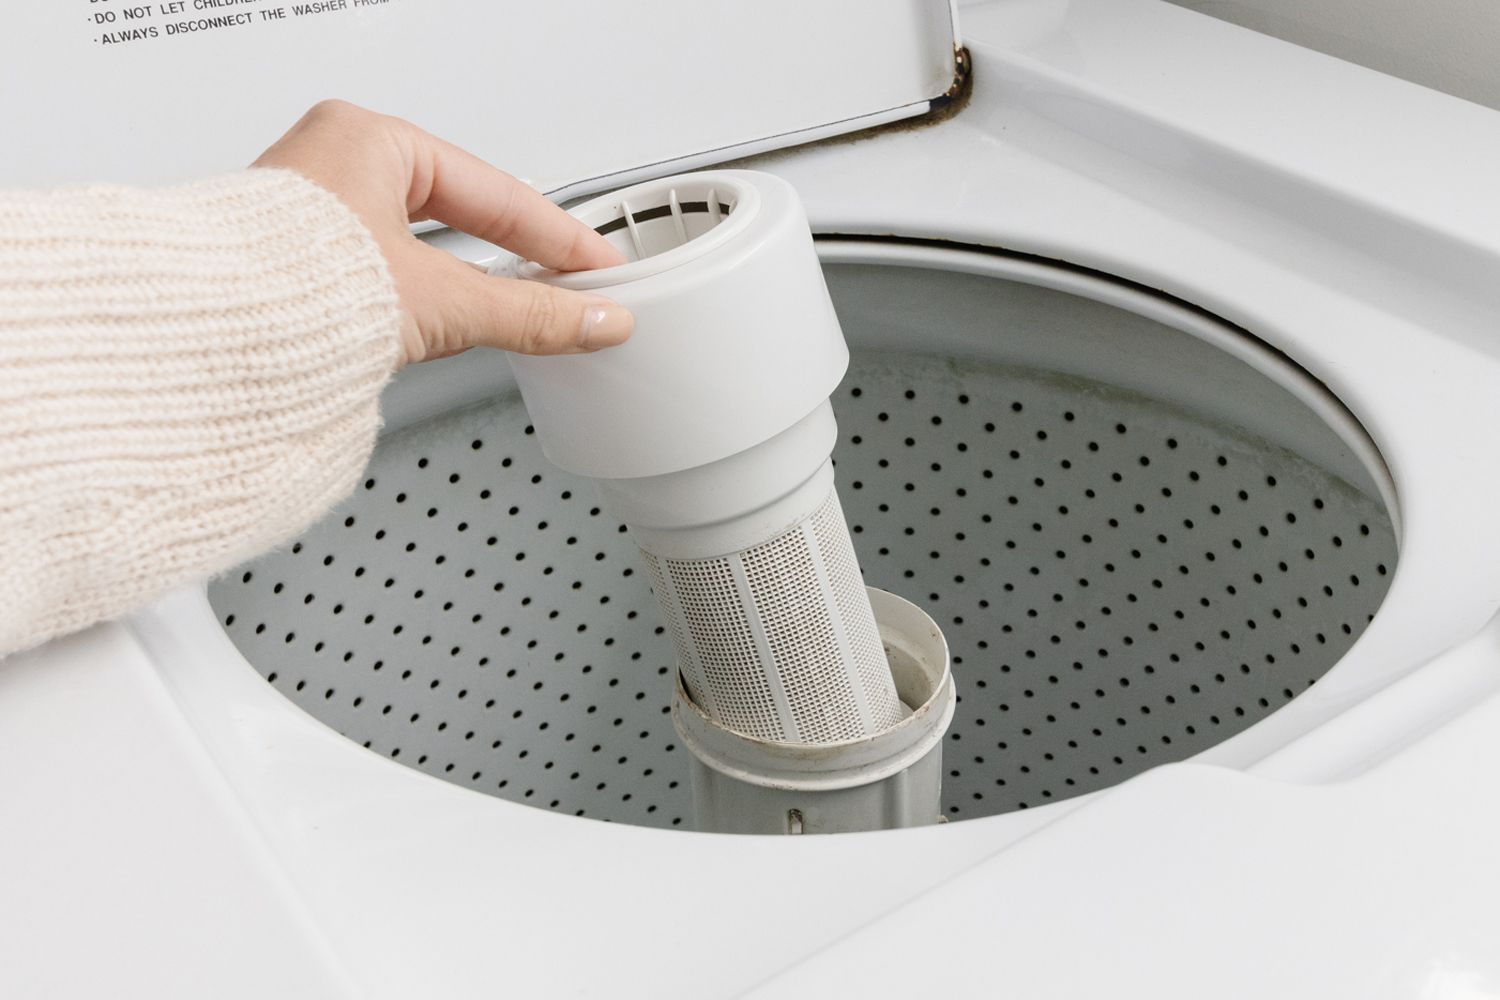 Washing Machine Lint Trap Super Filter for drainage hoses and stand pipes -  Drain-Net Technologies